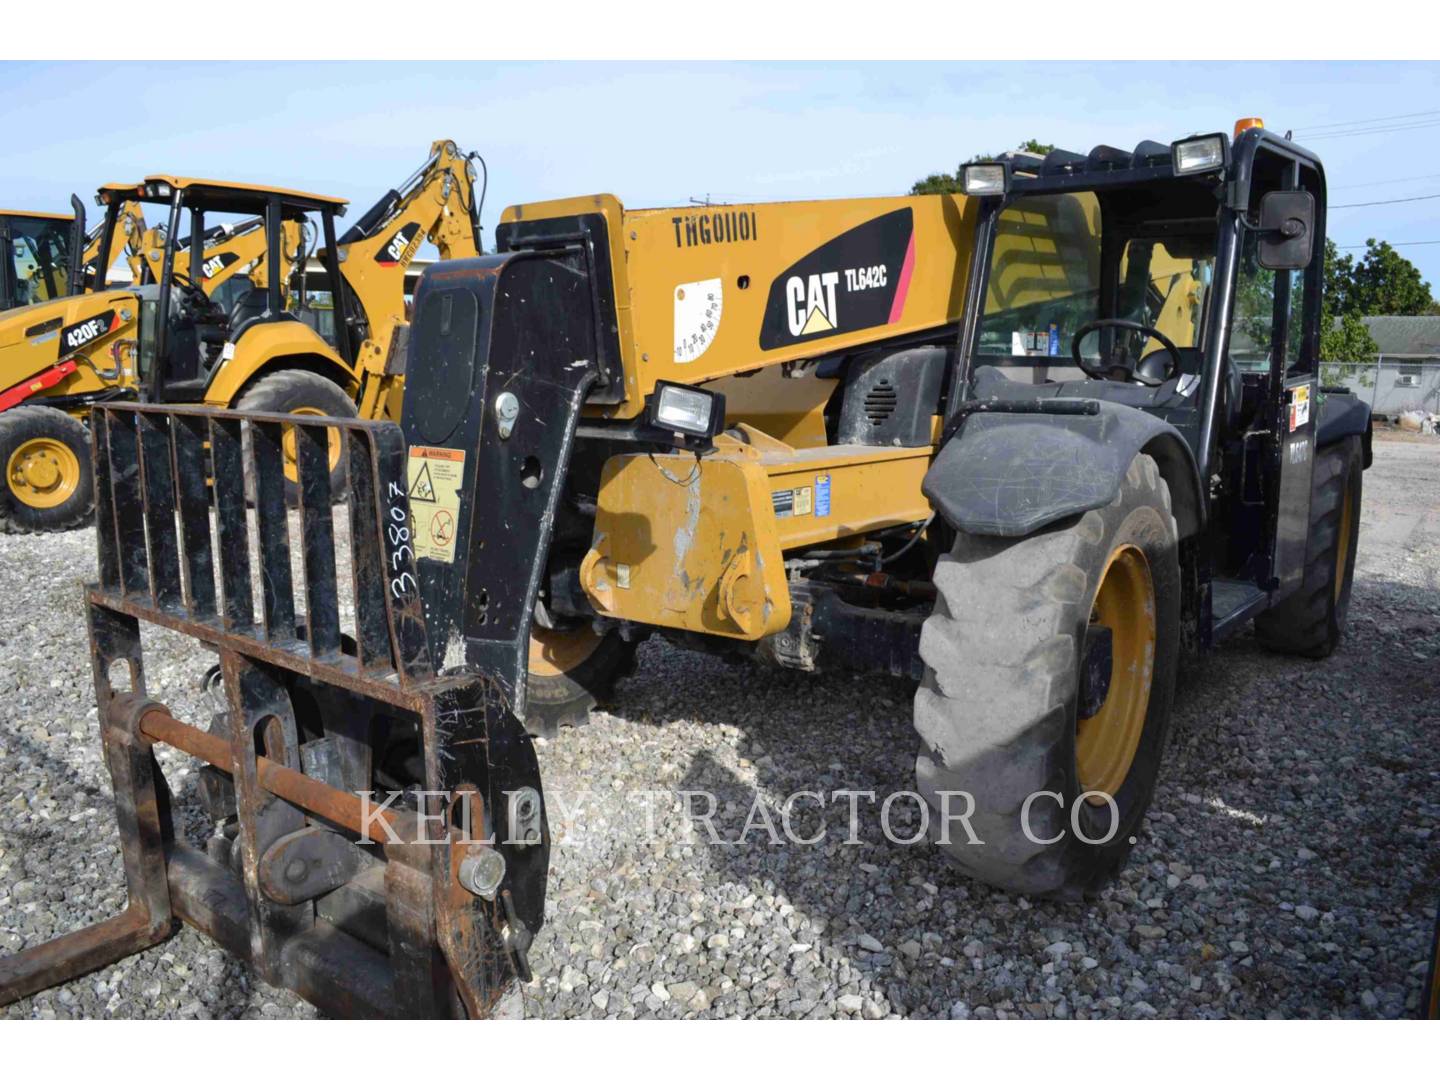 2014 Caterpillar Tl642c Telehandler For Sale In Miami Fd Ironsearch